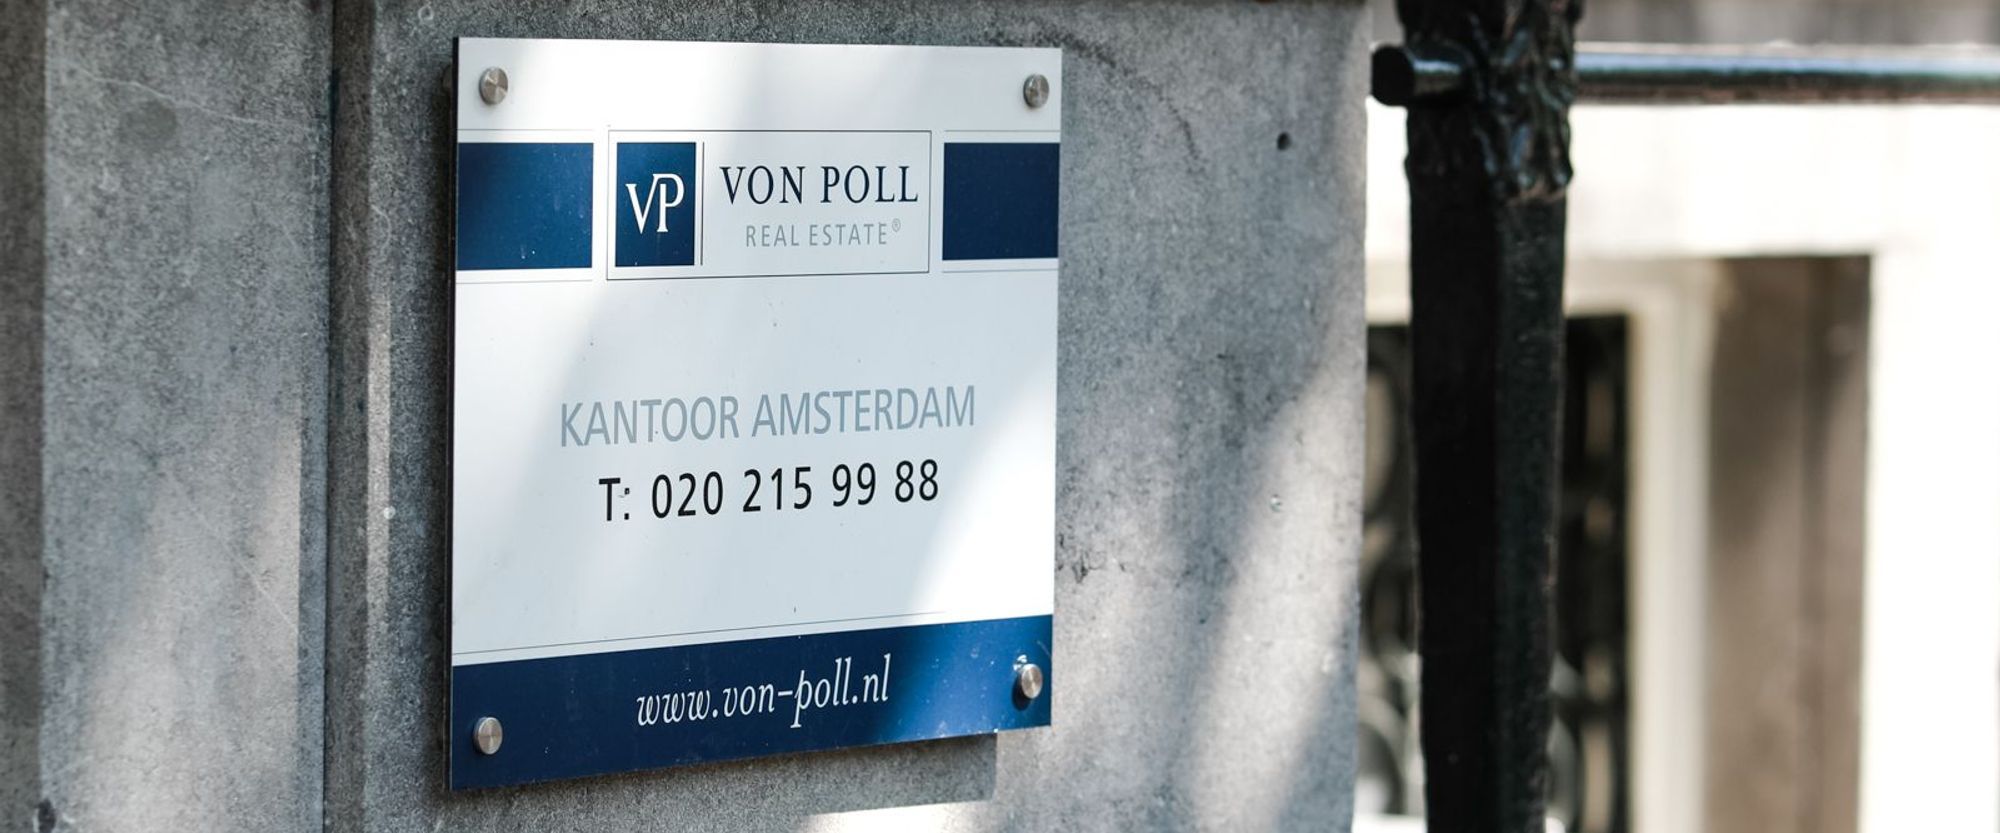 5 ways Von Poll Real Estate stands out as a real estate agency